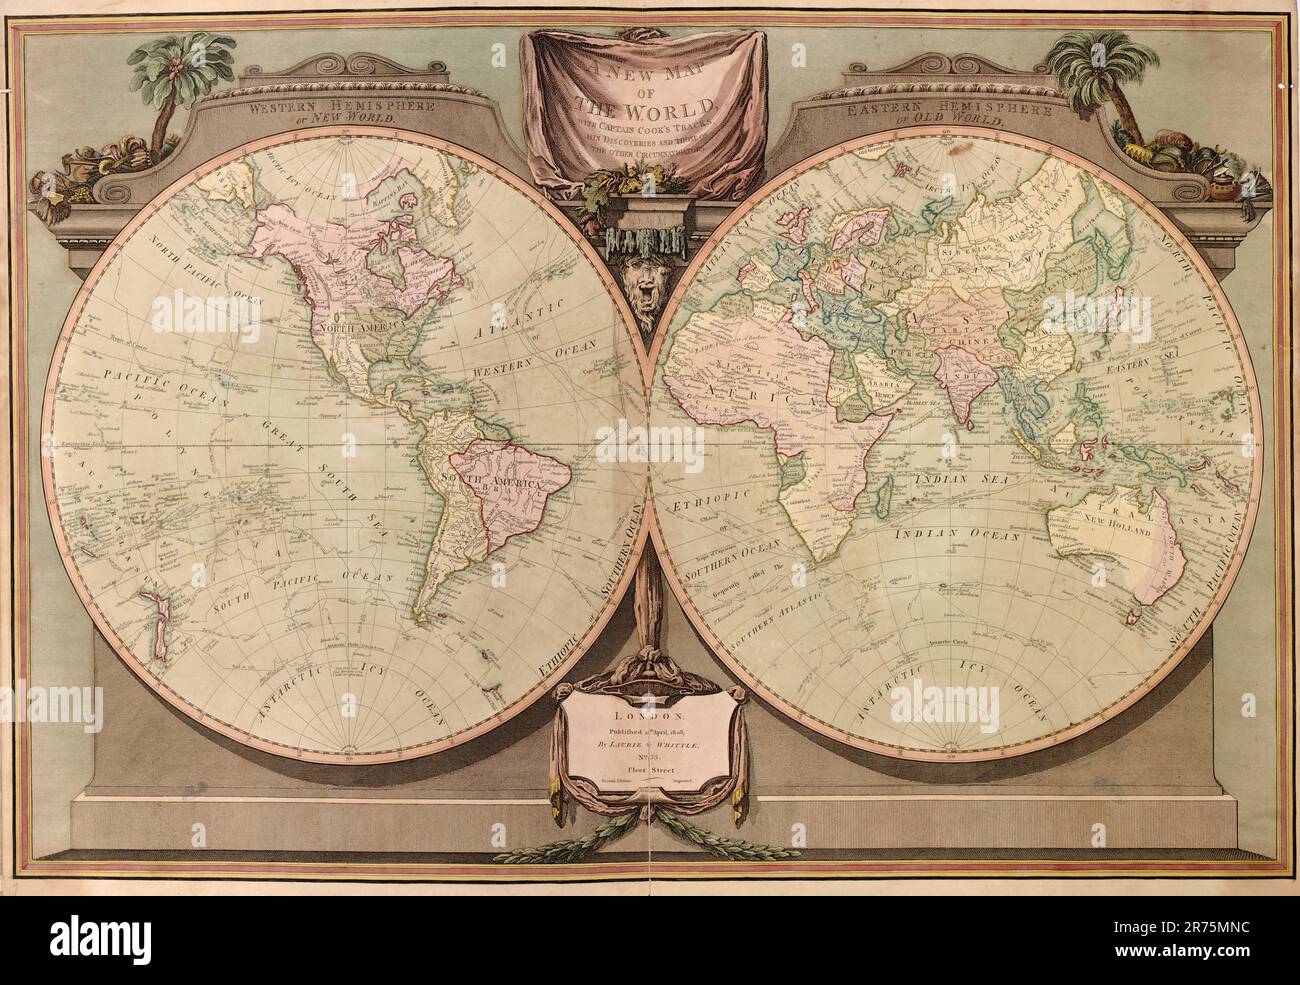 A new and elegant imperial sheet atlas, comprehending general and particular maps of every part of the world 1800 Stock Photo